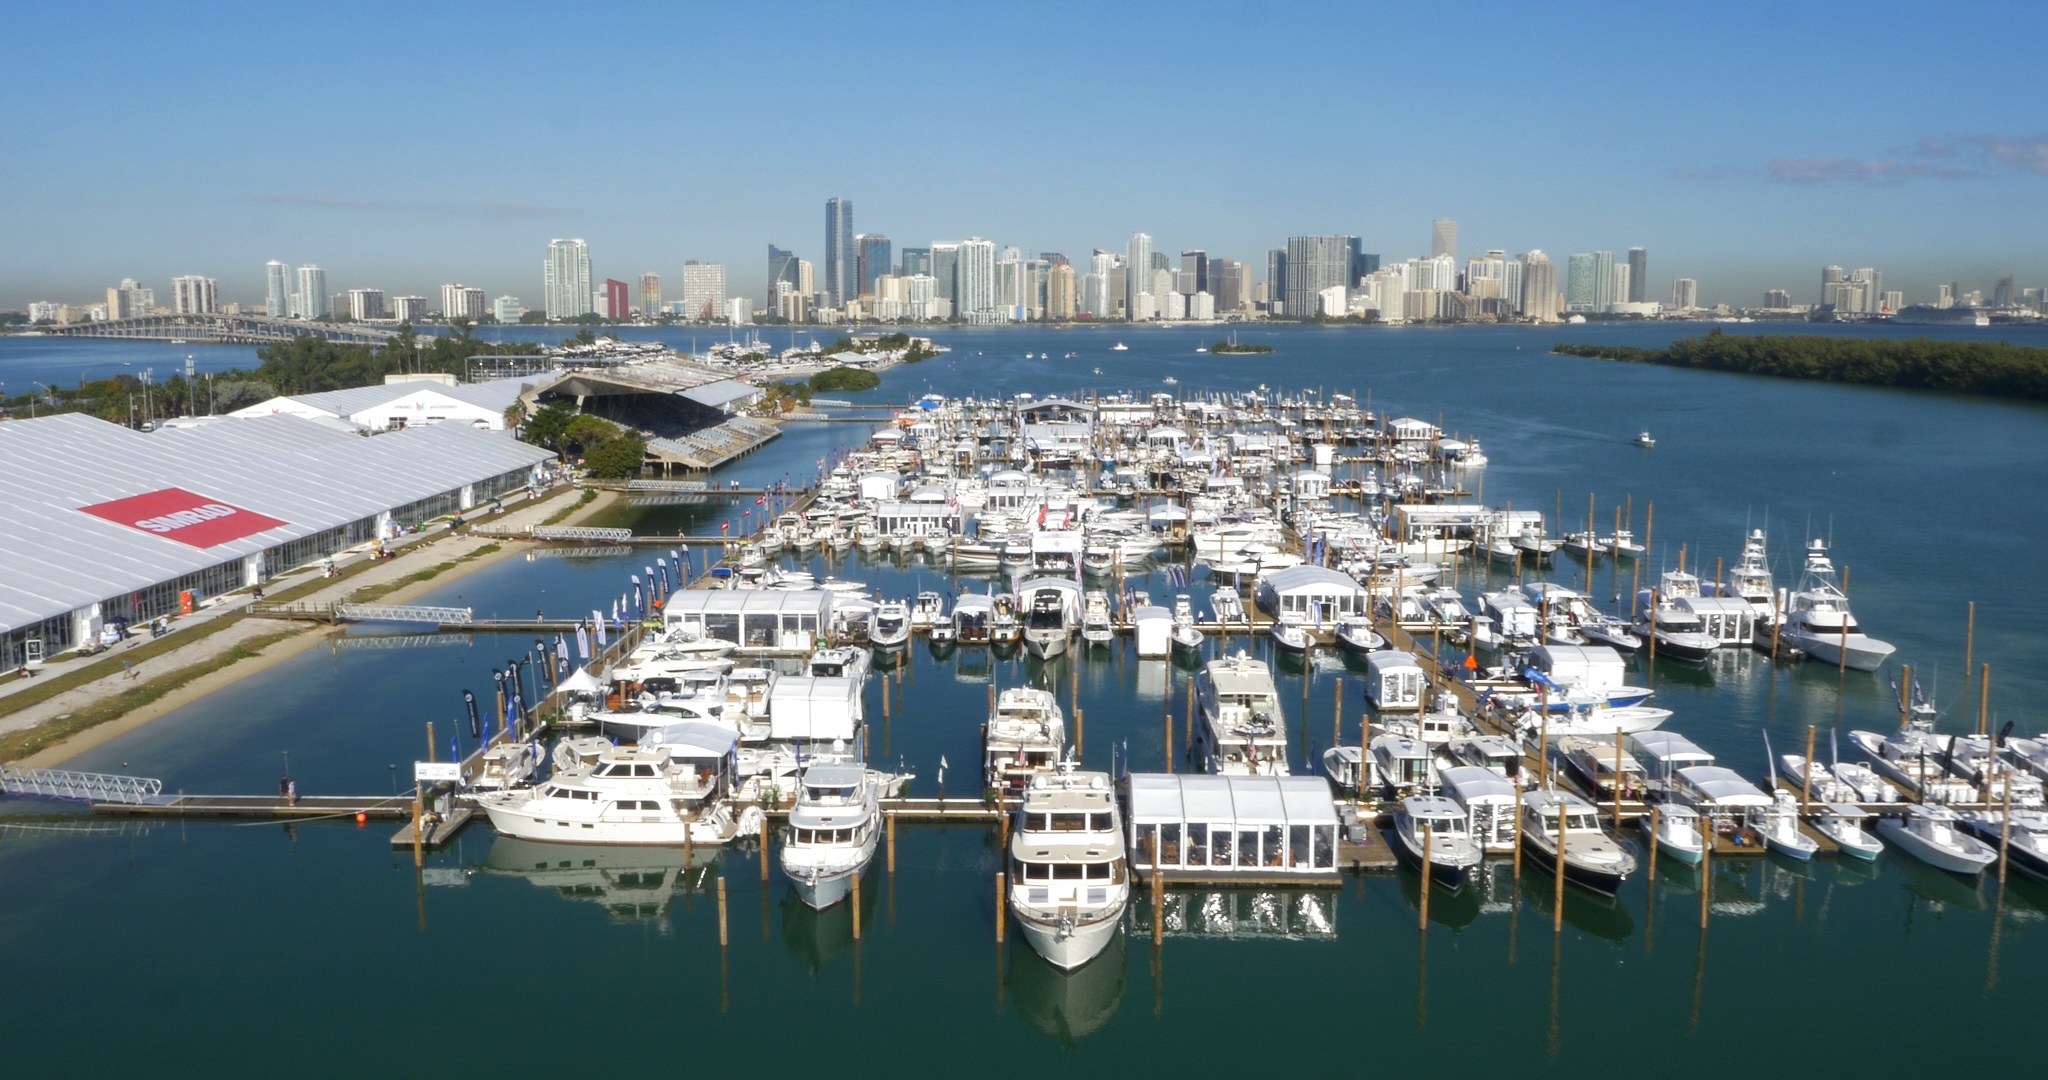 2022 Discover Boating Miami International Boat Show Kicks Off Wednesday